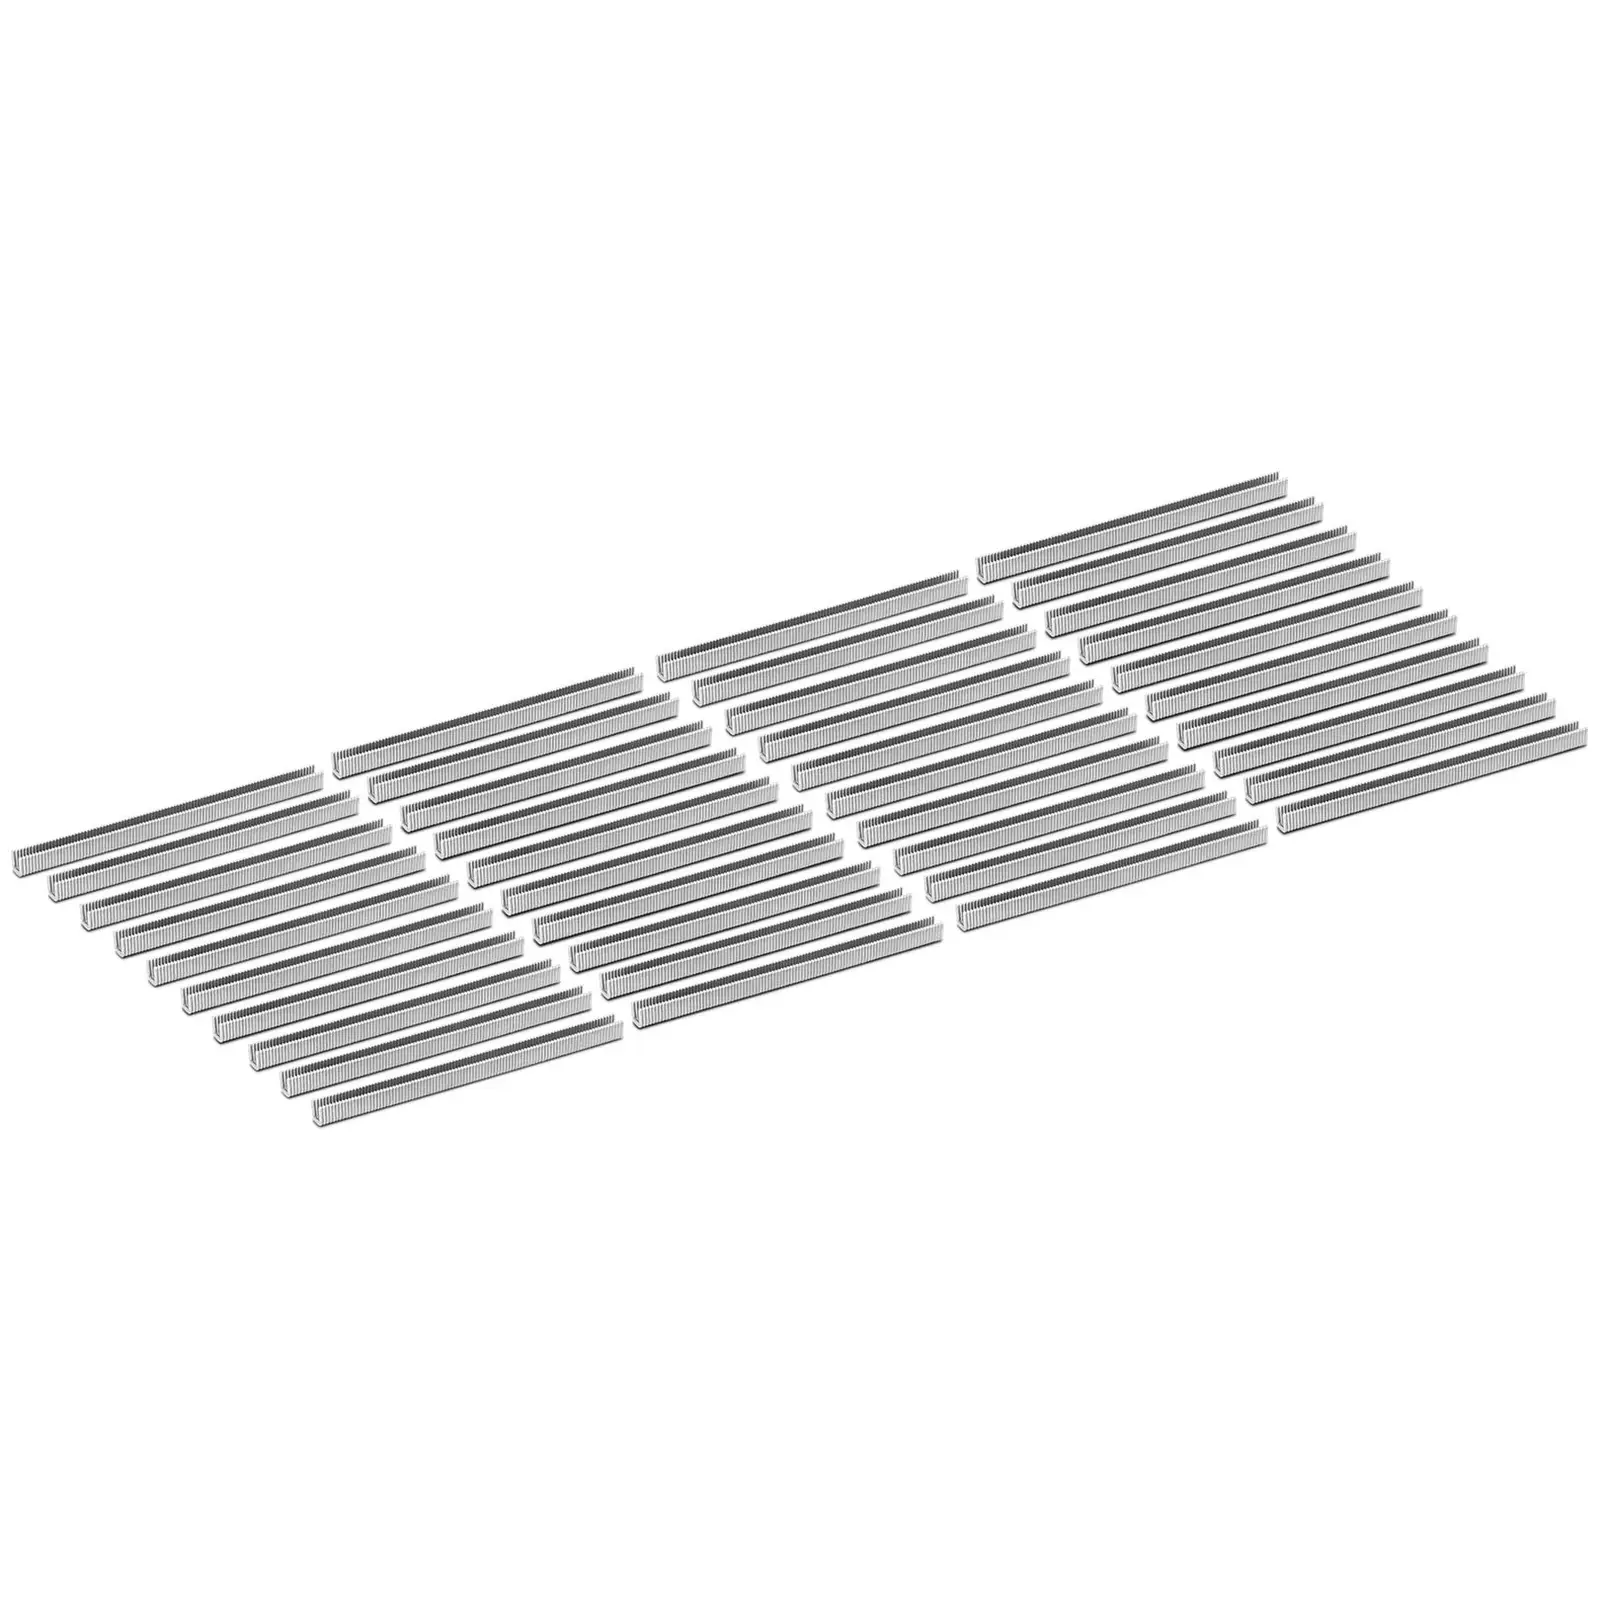 Clips for sausage clippers - 4000 pieces - 11 x 11.5 x 2 mm - royal_catering